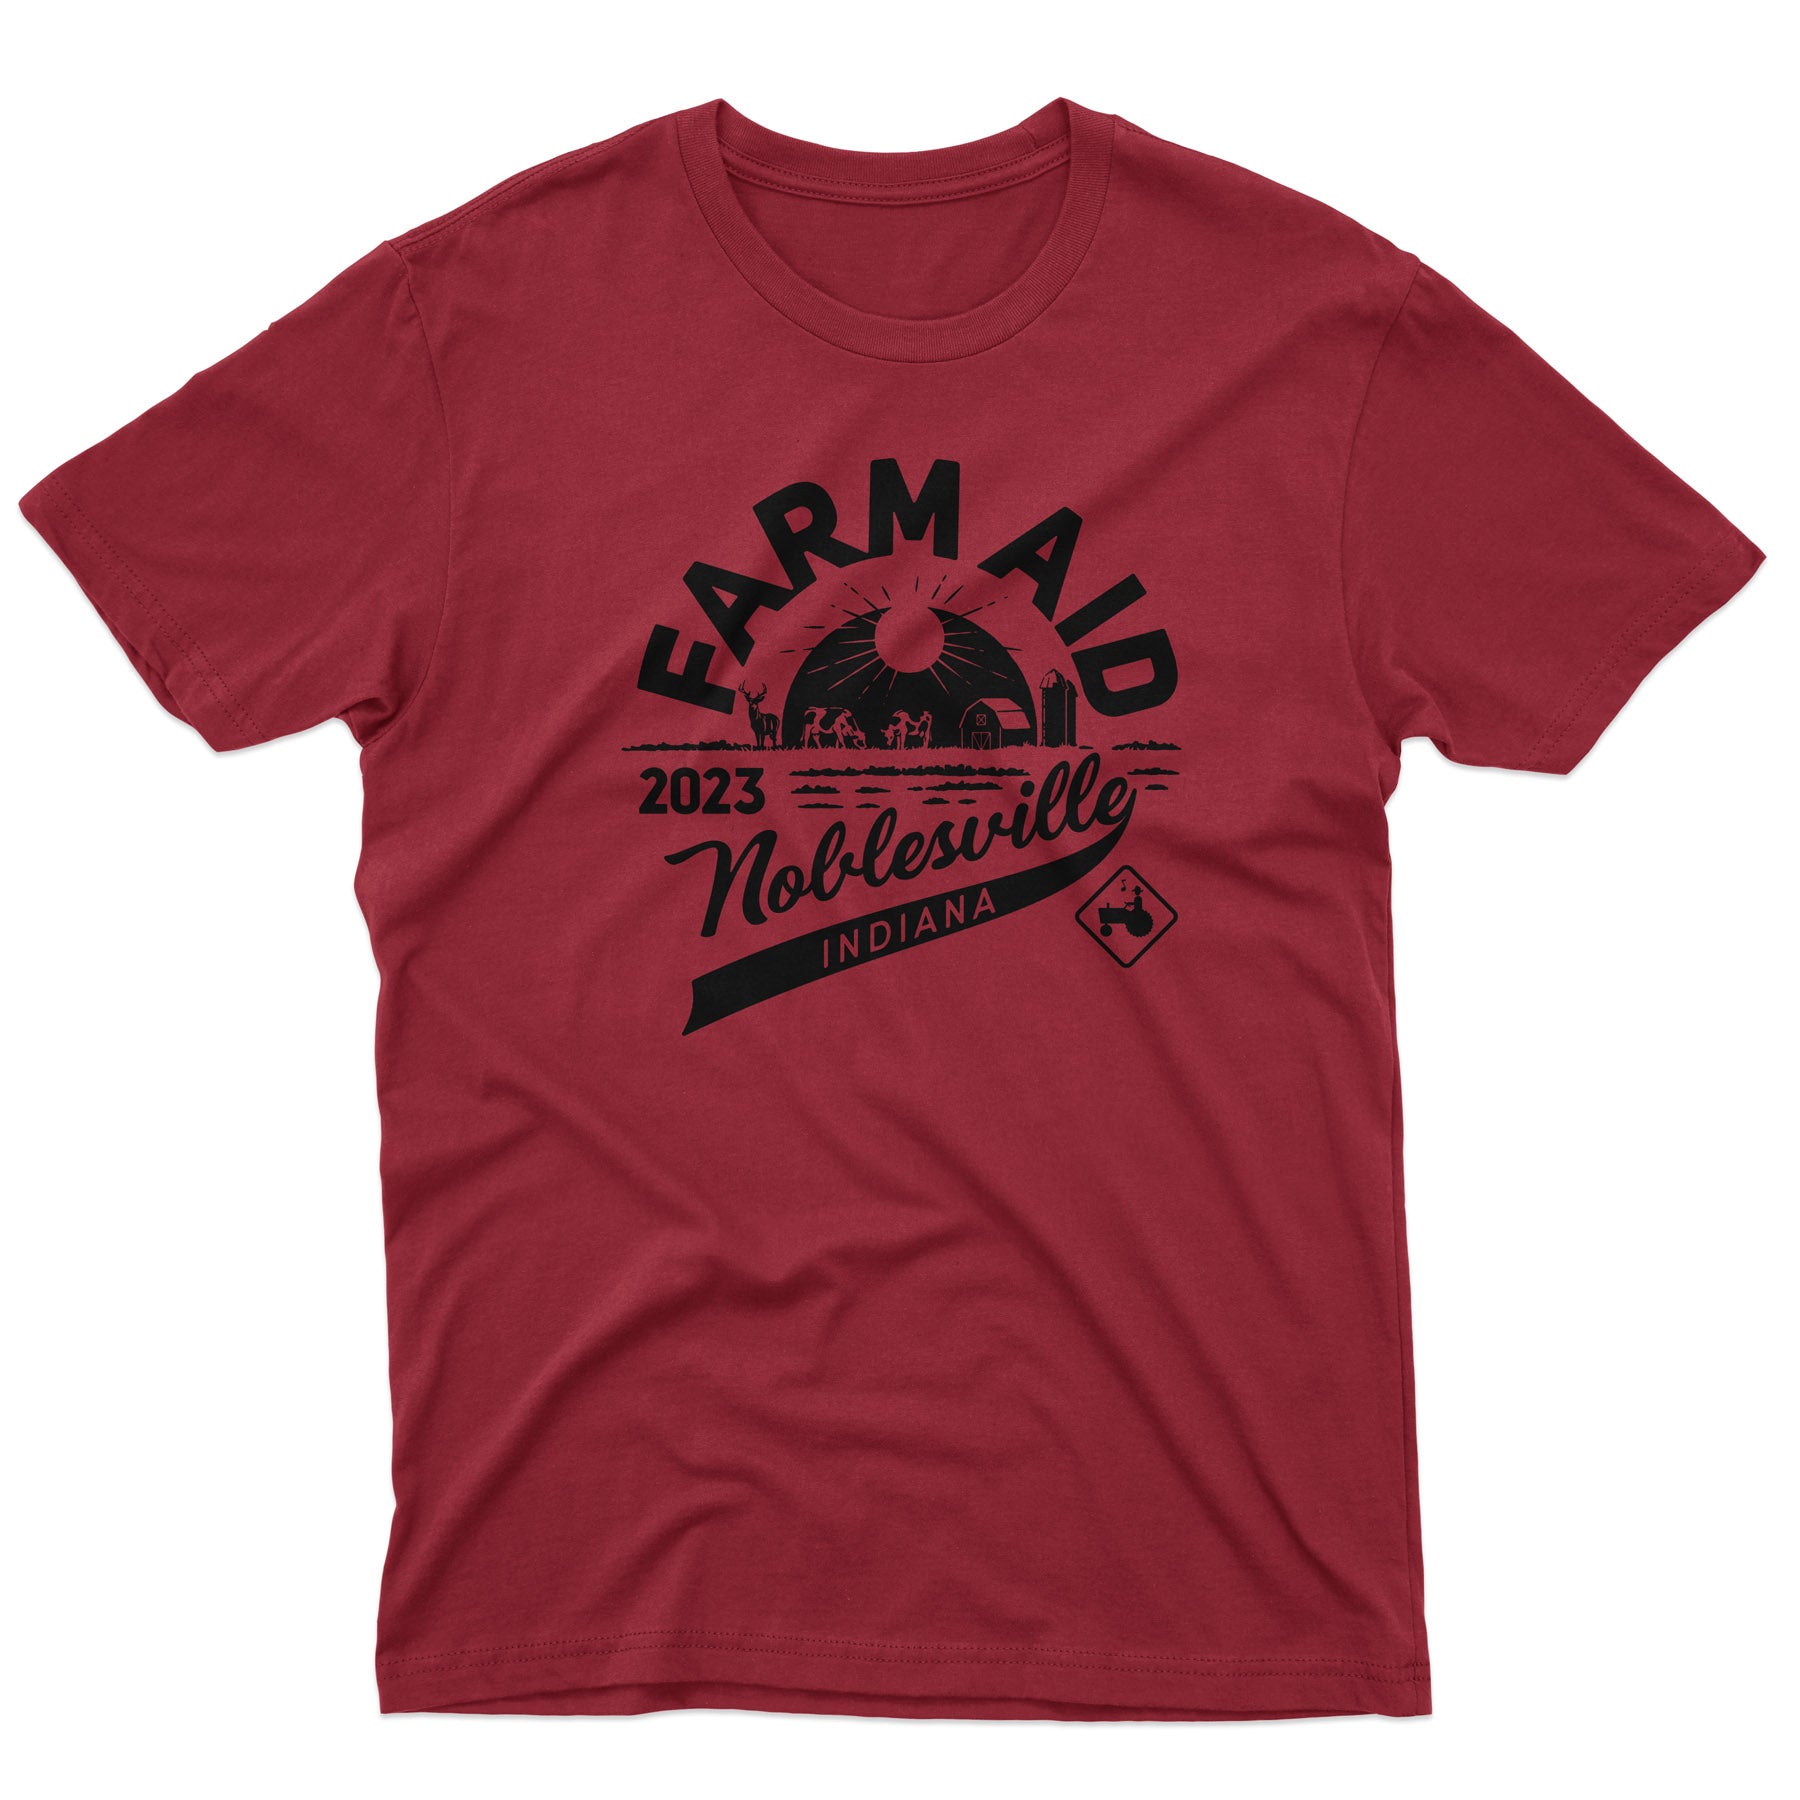 Farm Aid 2023 Noblesville Tee – Red